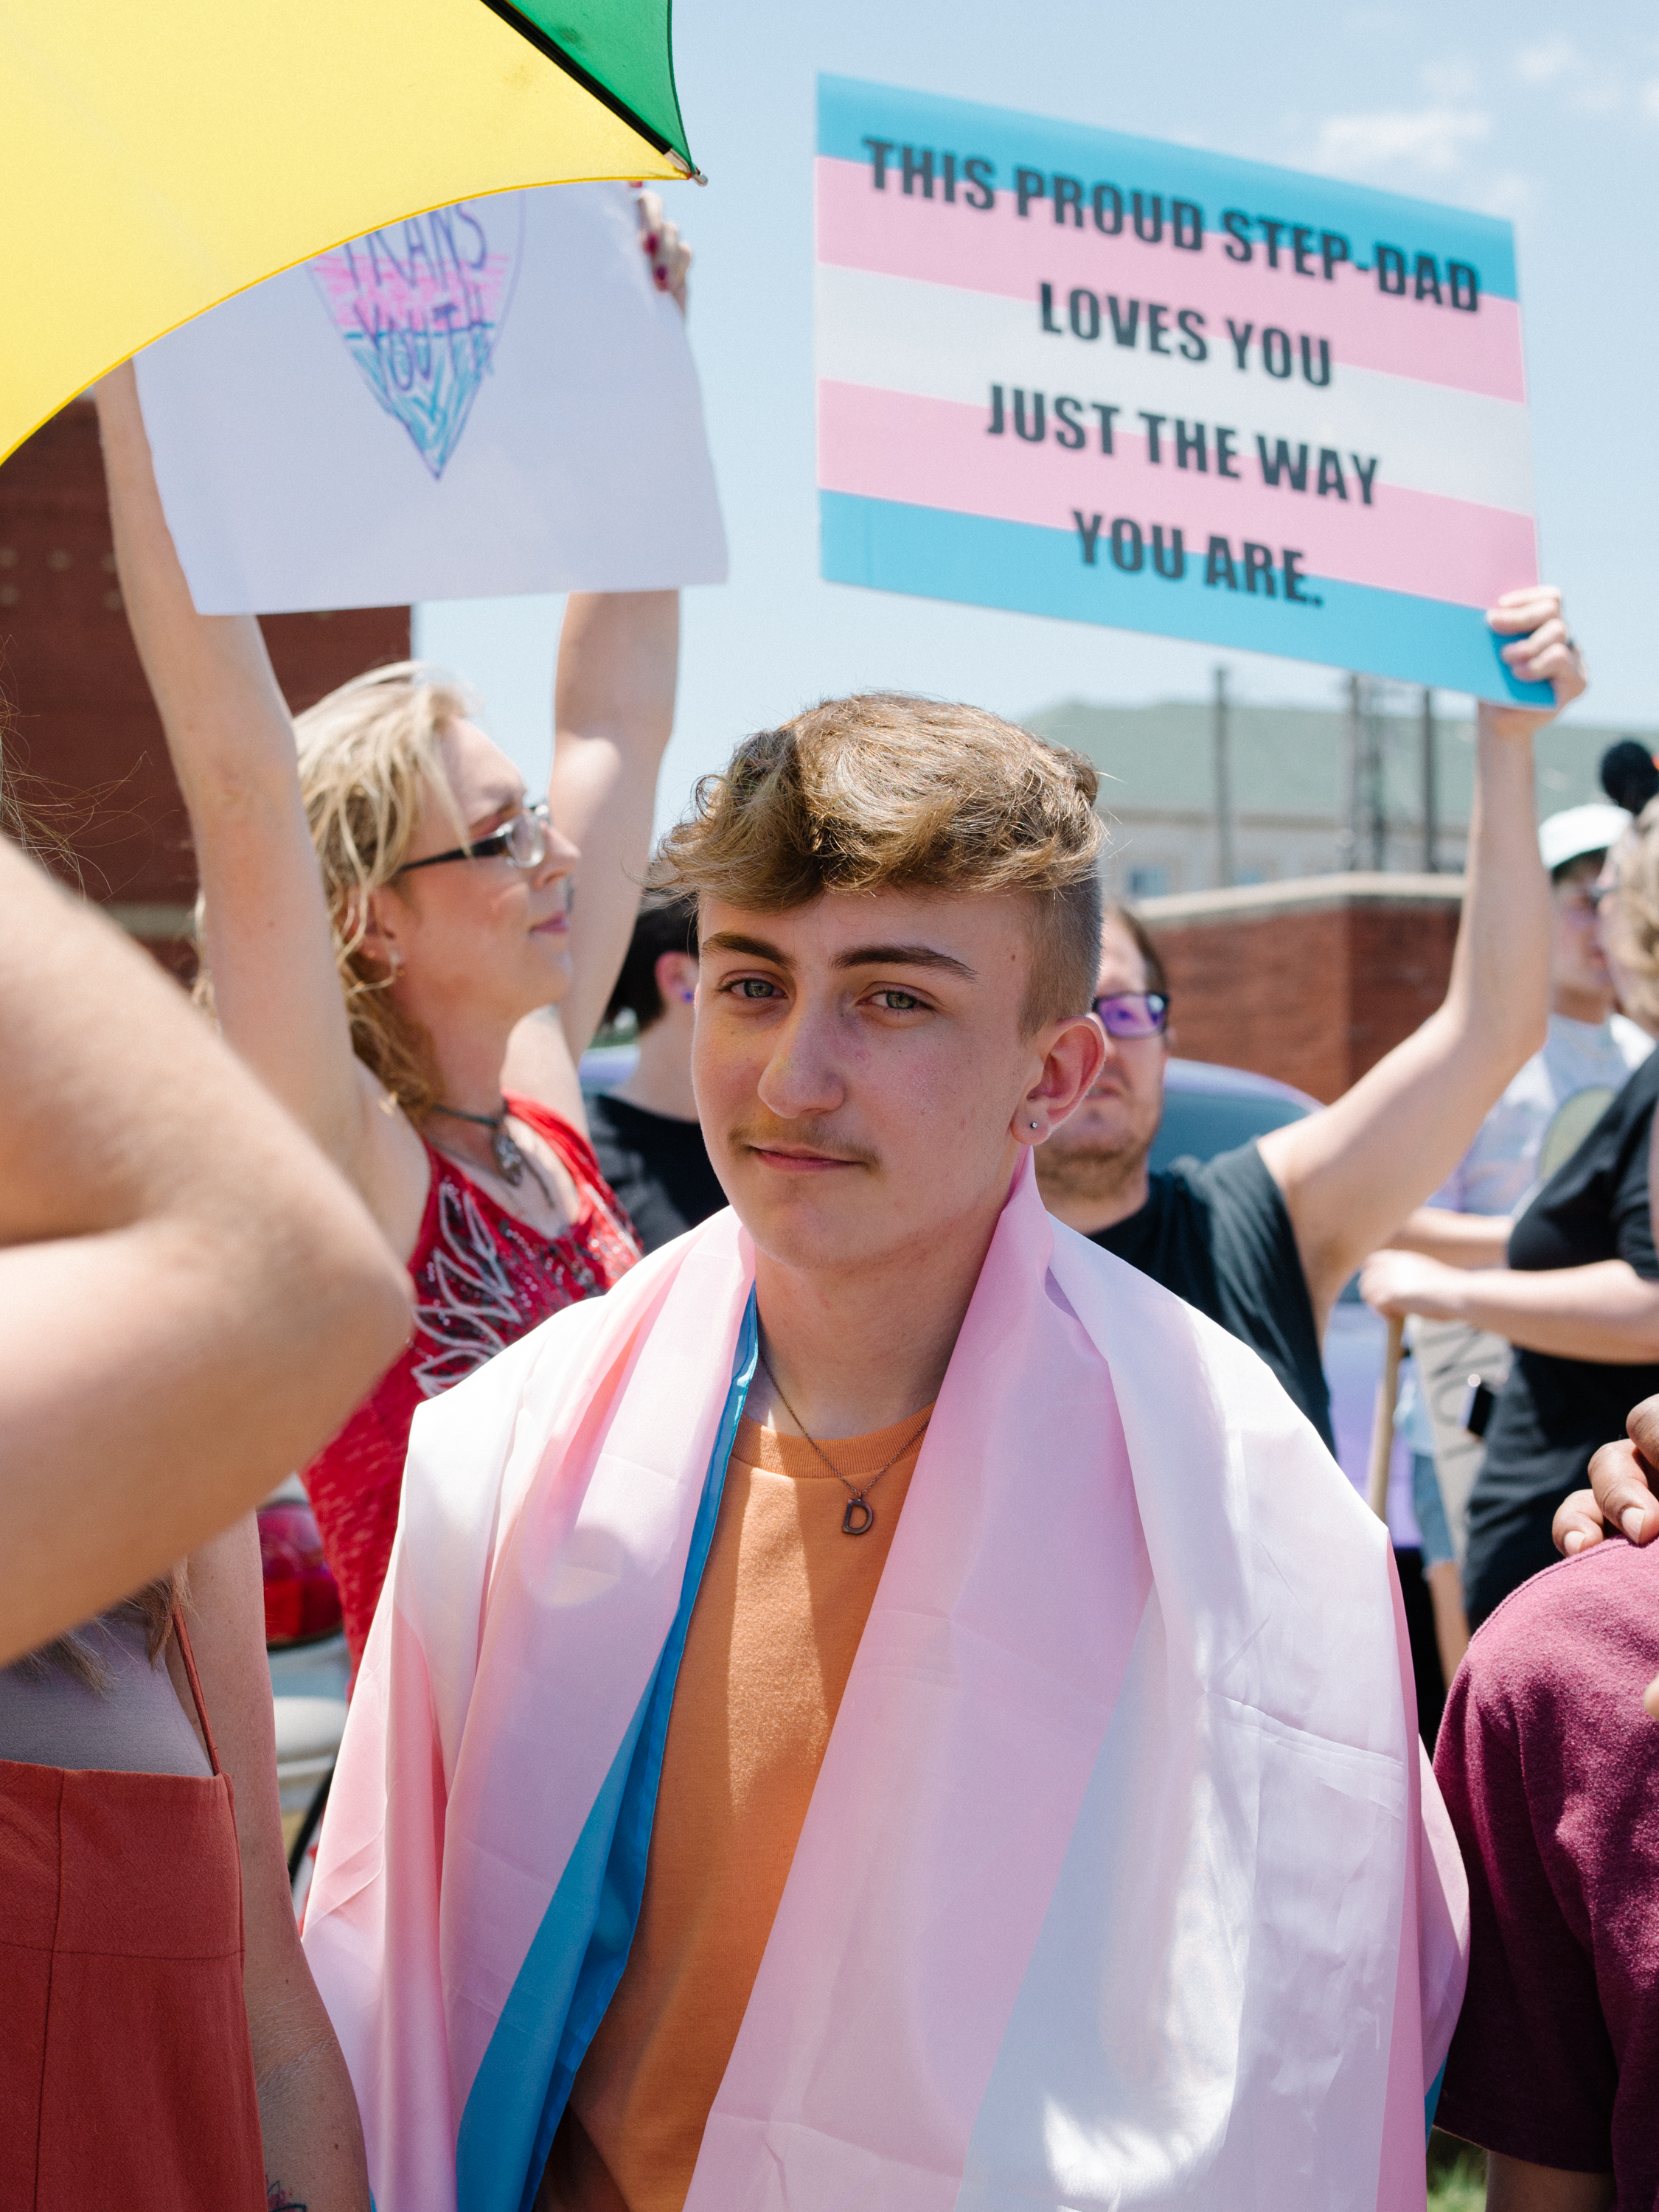 Fifteen-year-old Dylan Brandt, one of the four trans children represented in the ACLU's lawsuit, at a protest earlier this year. (Courtesy of the ACLU/Rana Young)